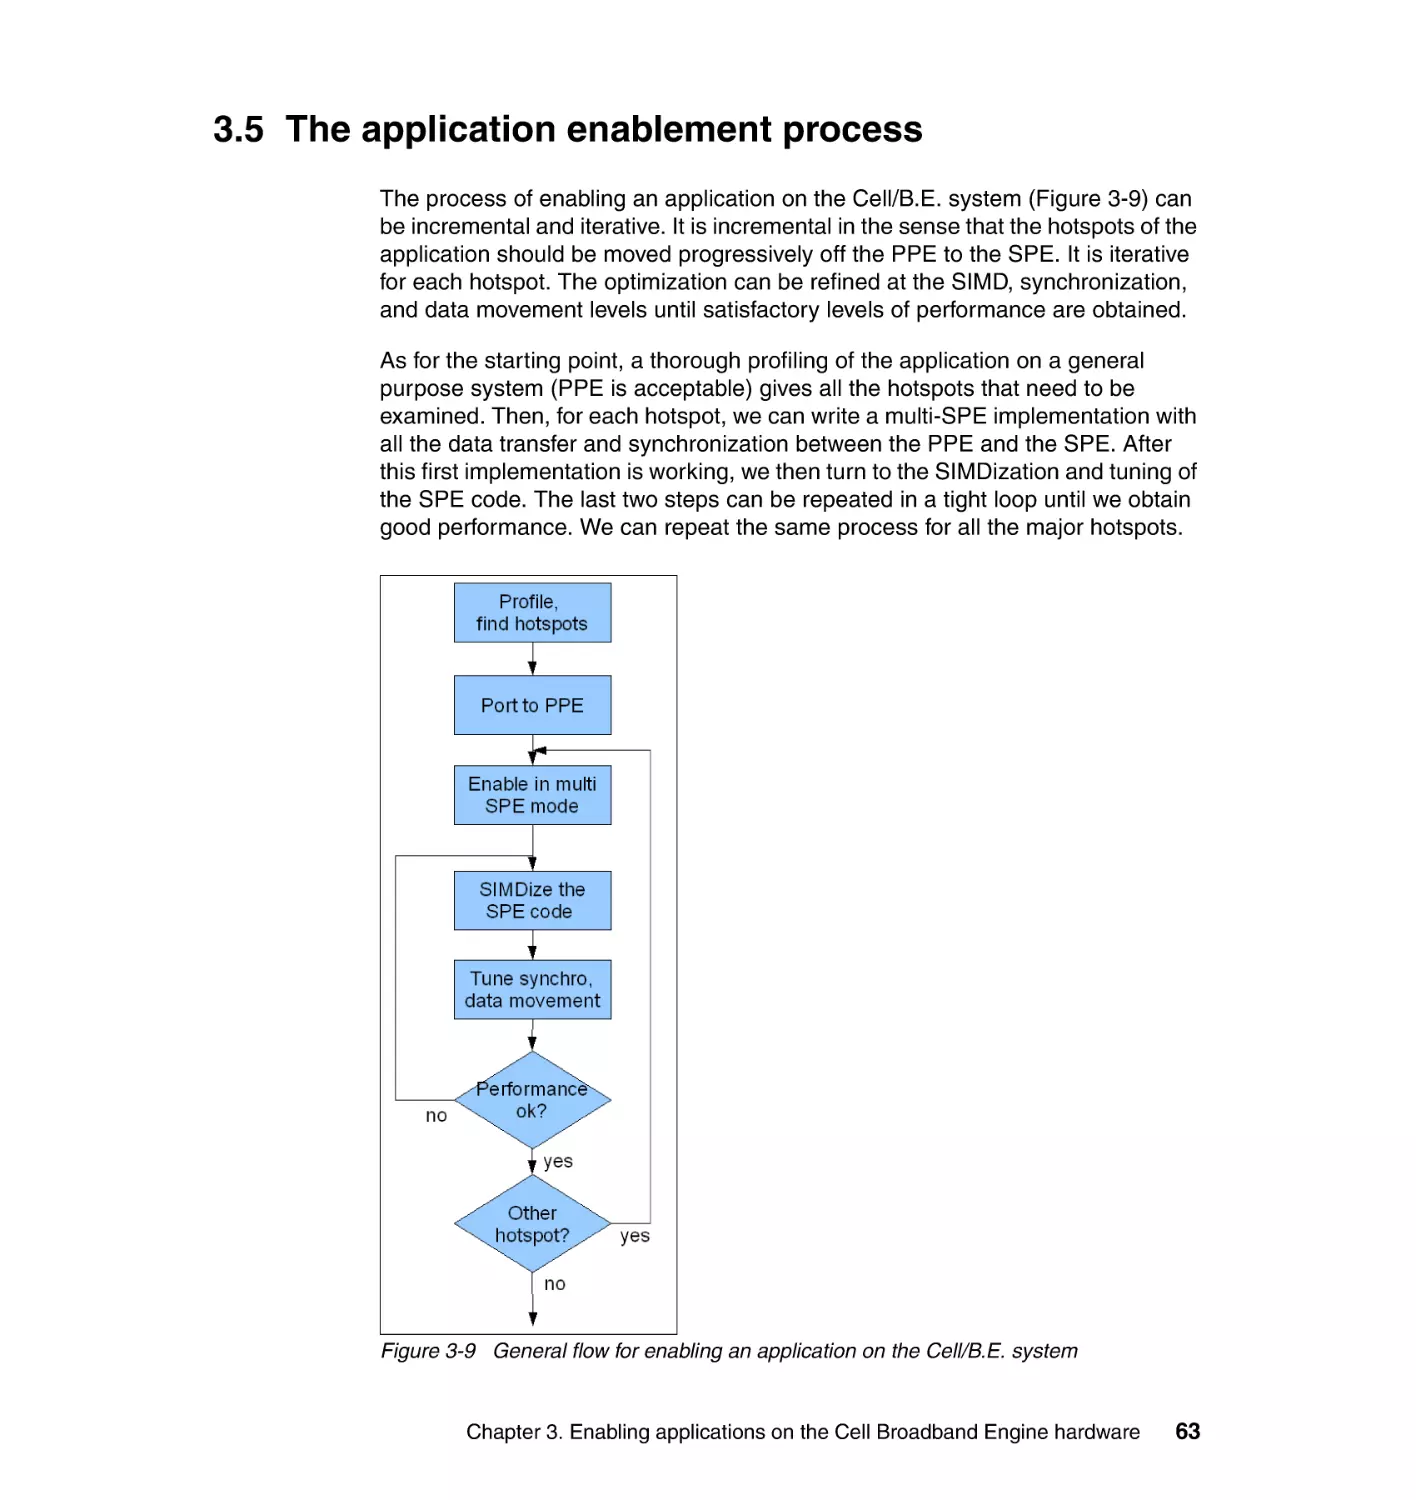 3.5 The application enablement process